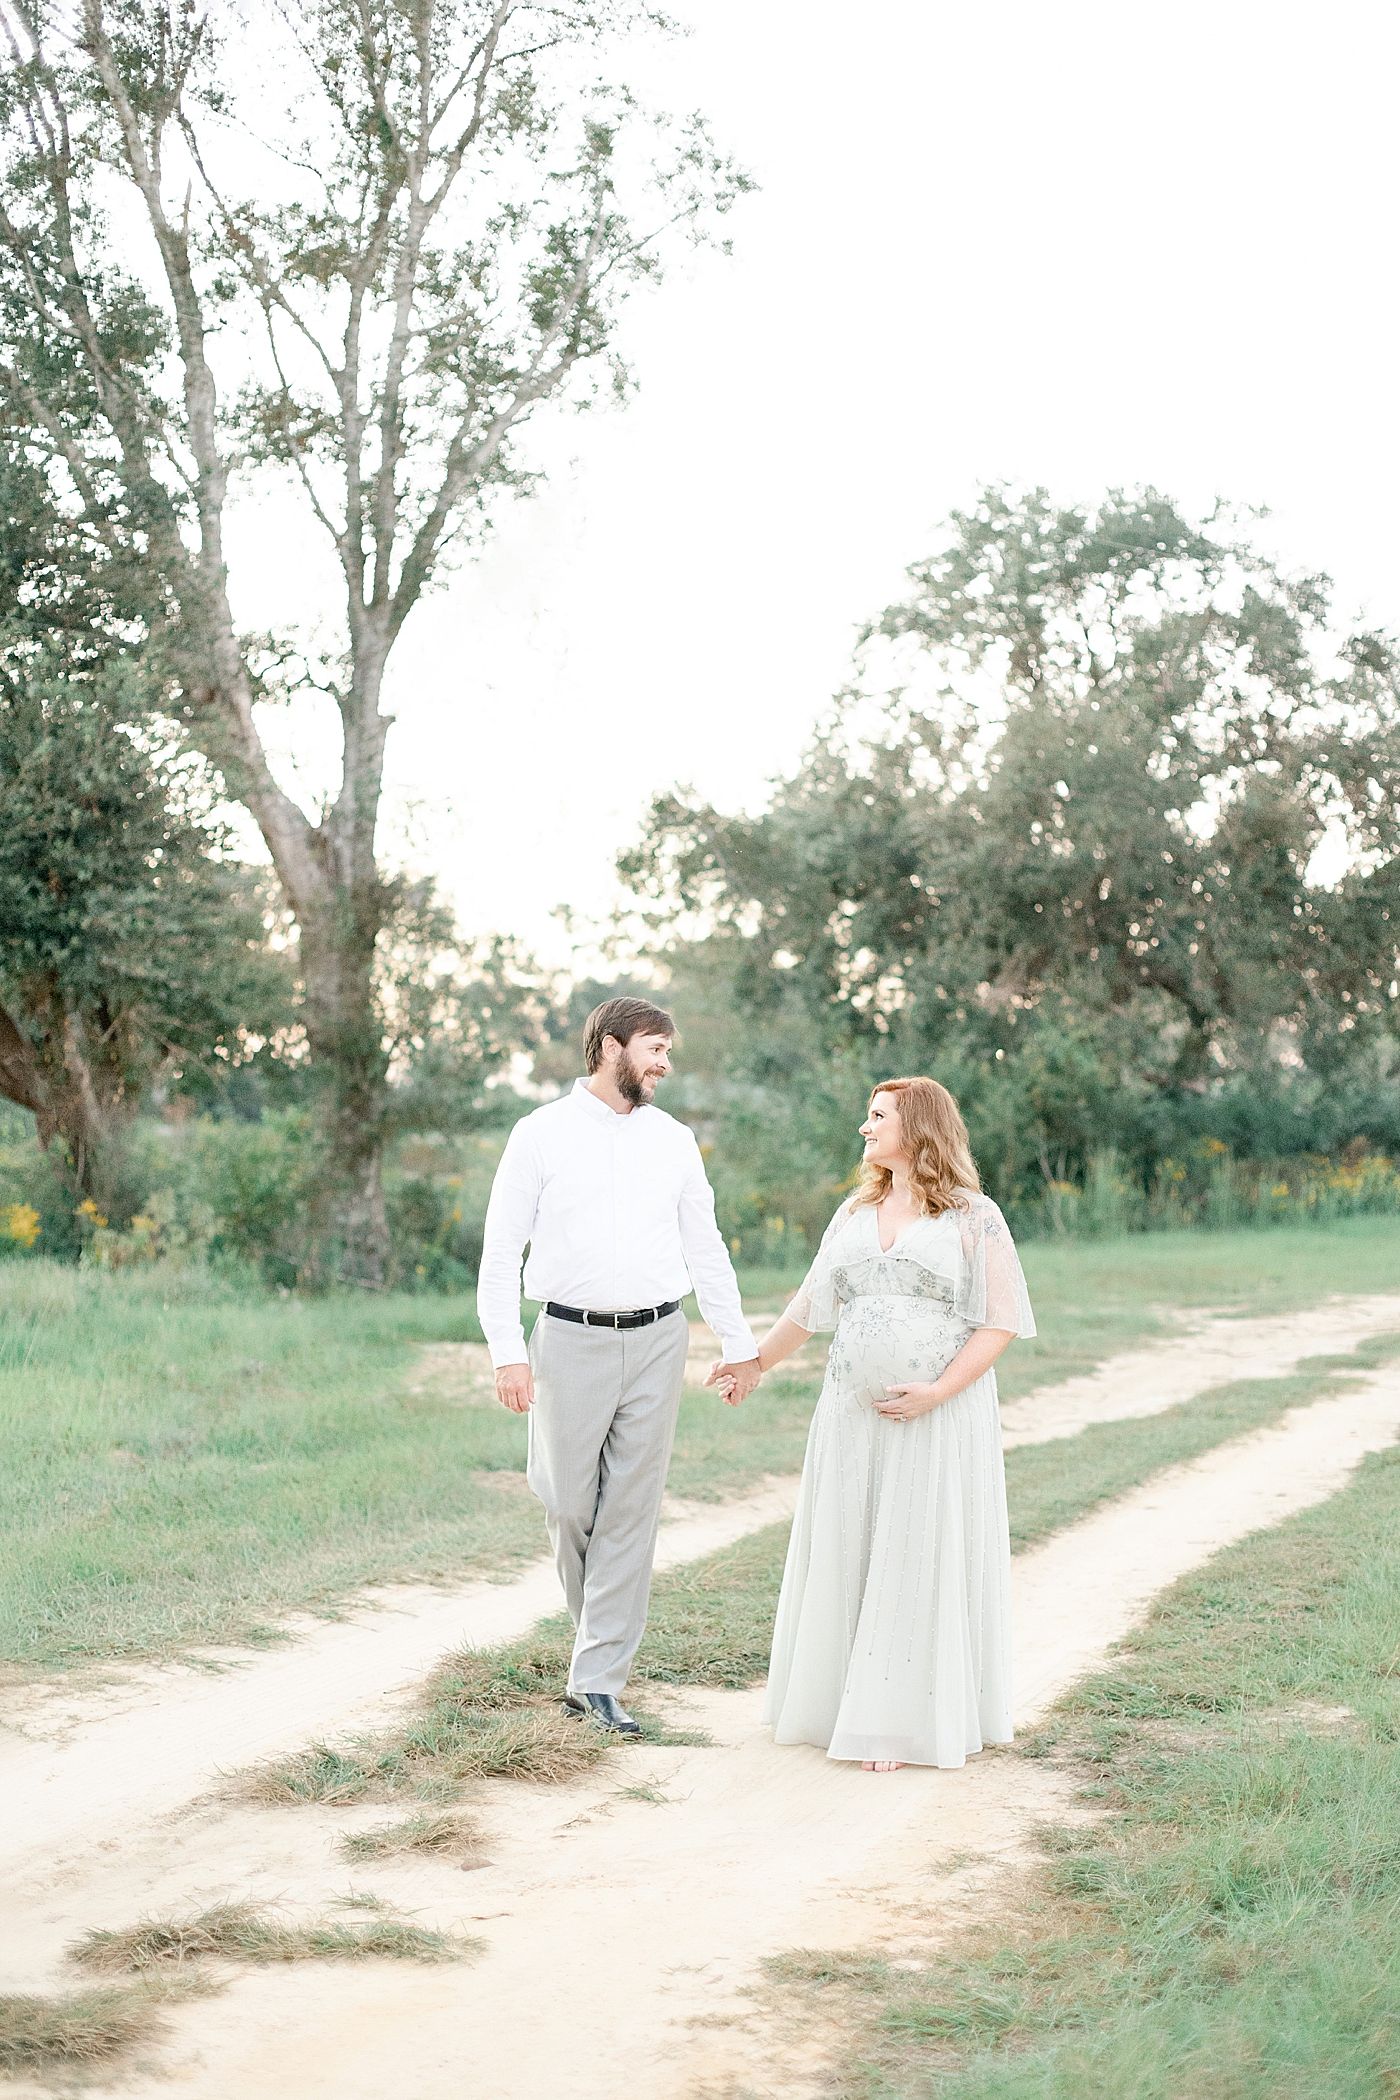 Mother and father walking a dirt path | Photo by Ocean Springs MS Maternity Photographer Little Sunshine Photography 